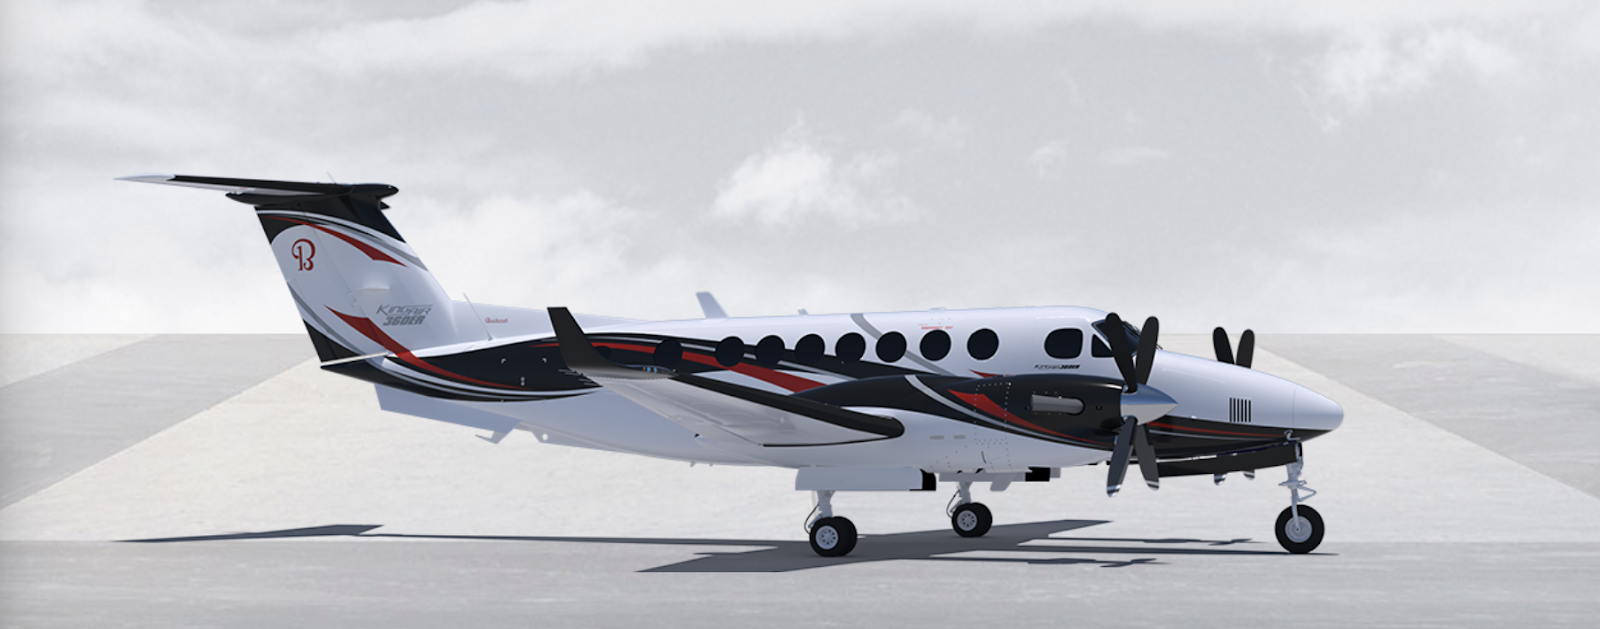 Digital side view of a King Air aircraft.